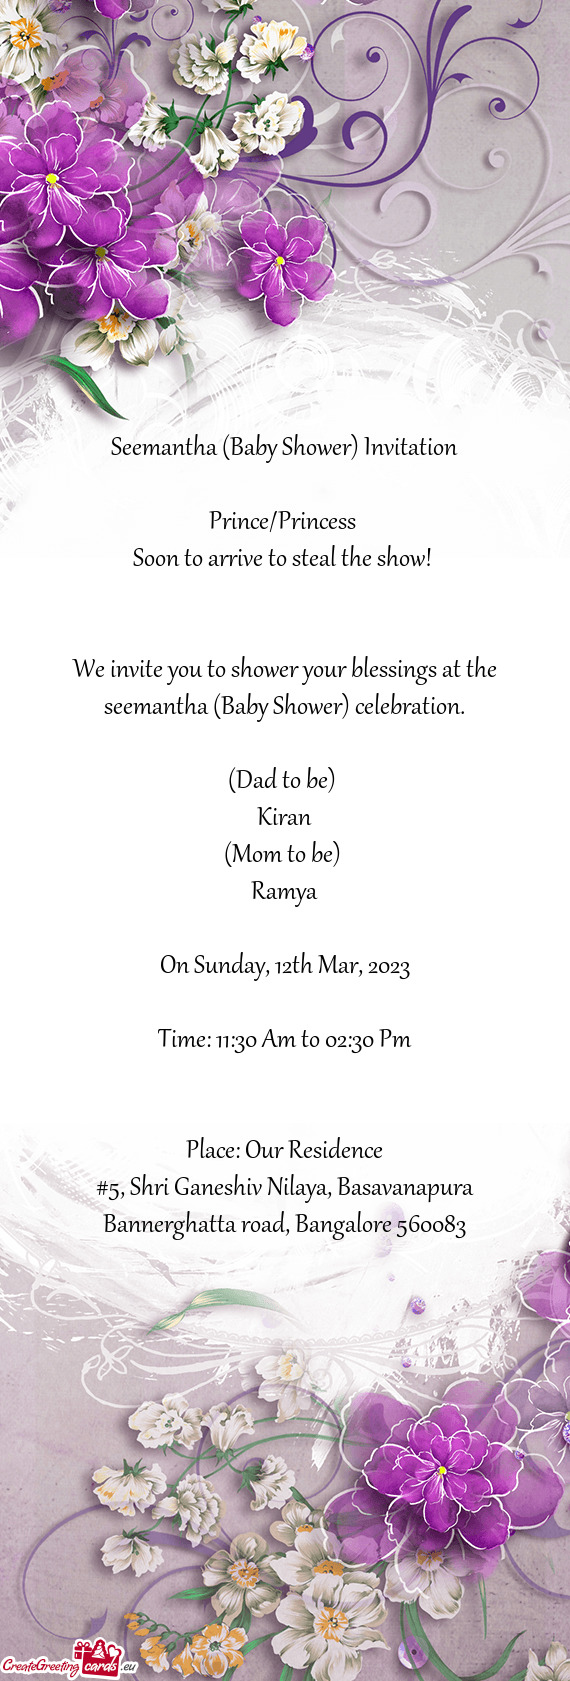 We invite you to shower your blessings at the seemantha (Baby Shower) celebration